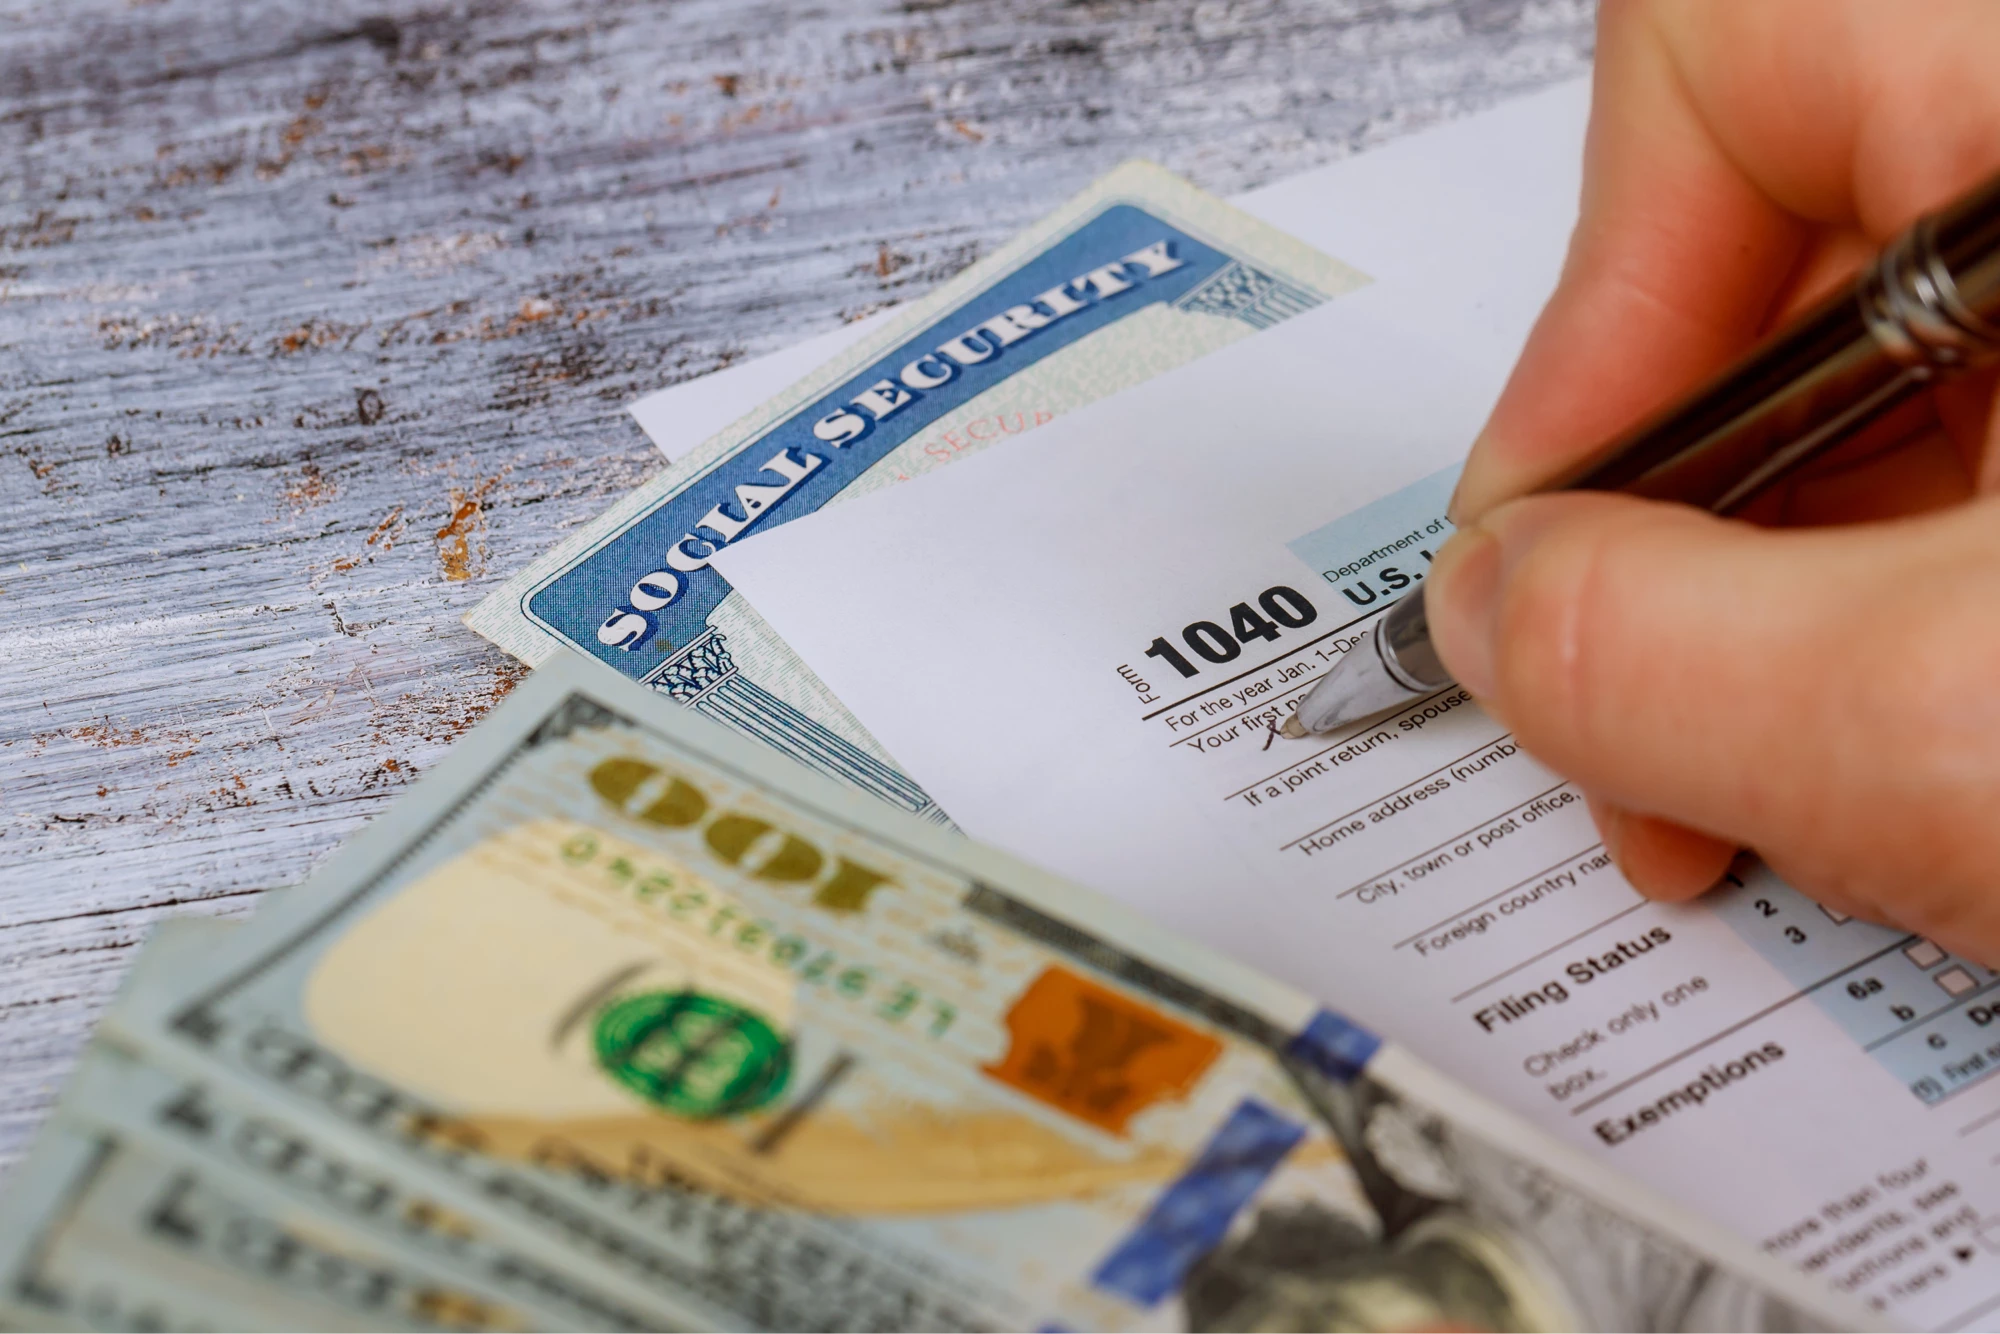 IRS orders immediate stop to new Employee Retention Credit processing